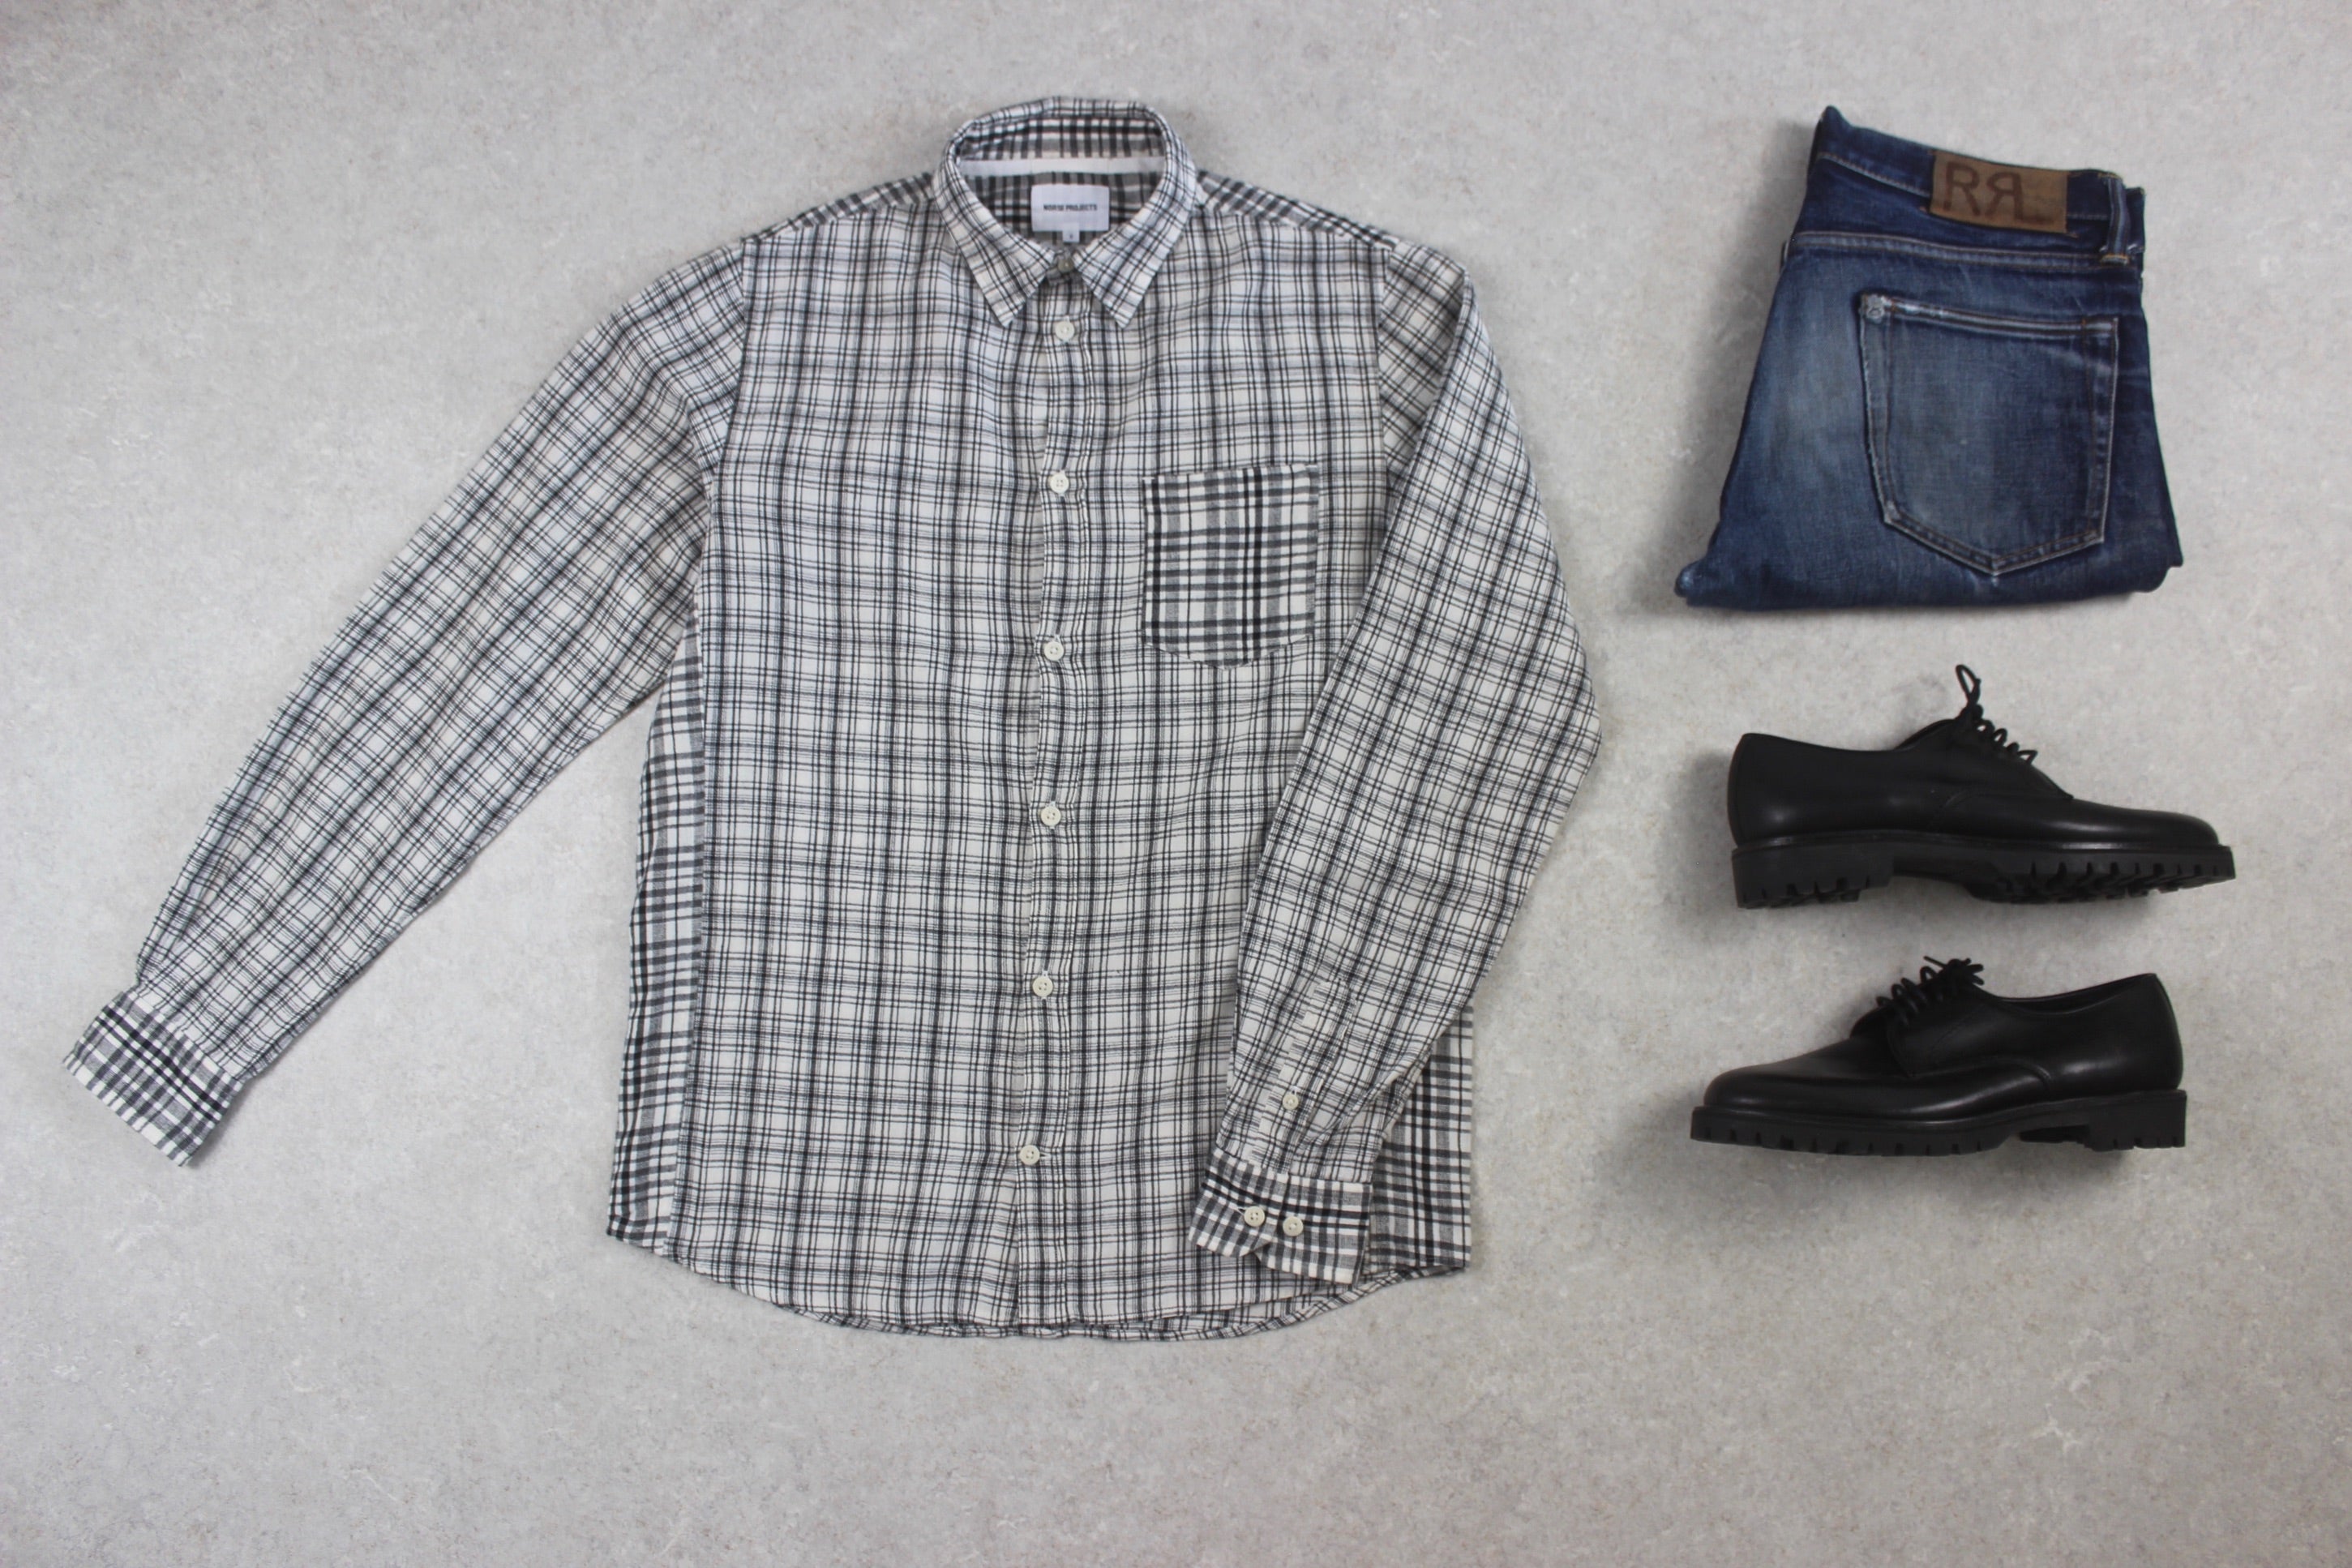 Norse Projects - Cotton/Linen Shirt - White/Black Check - Small